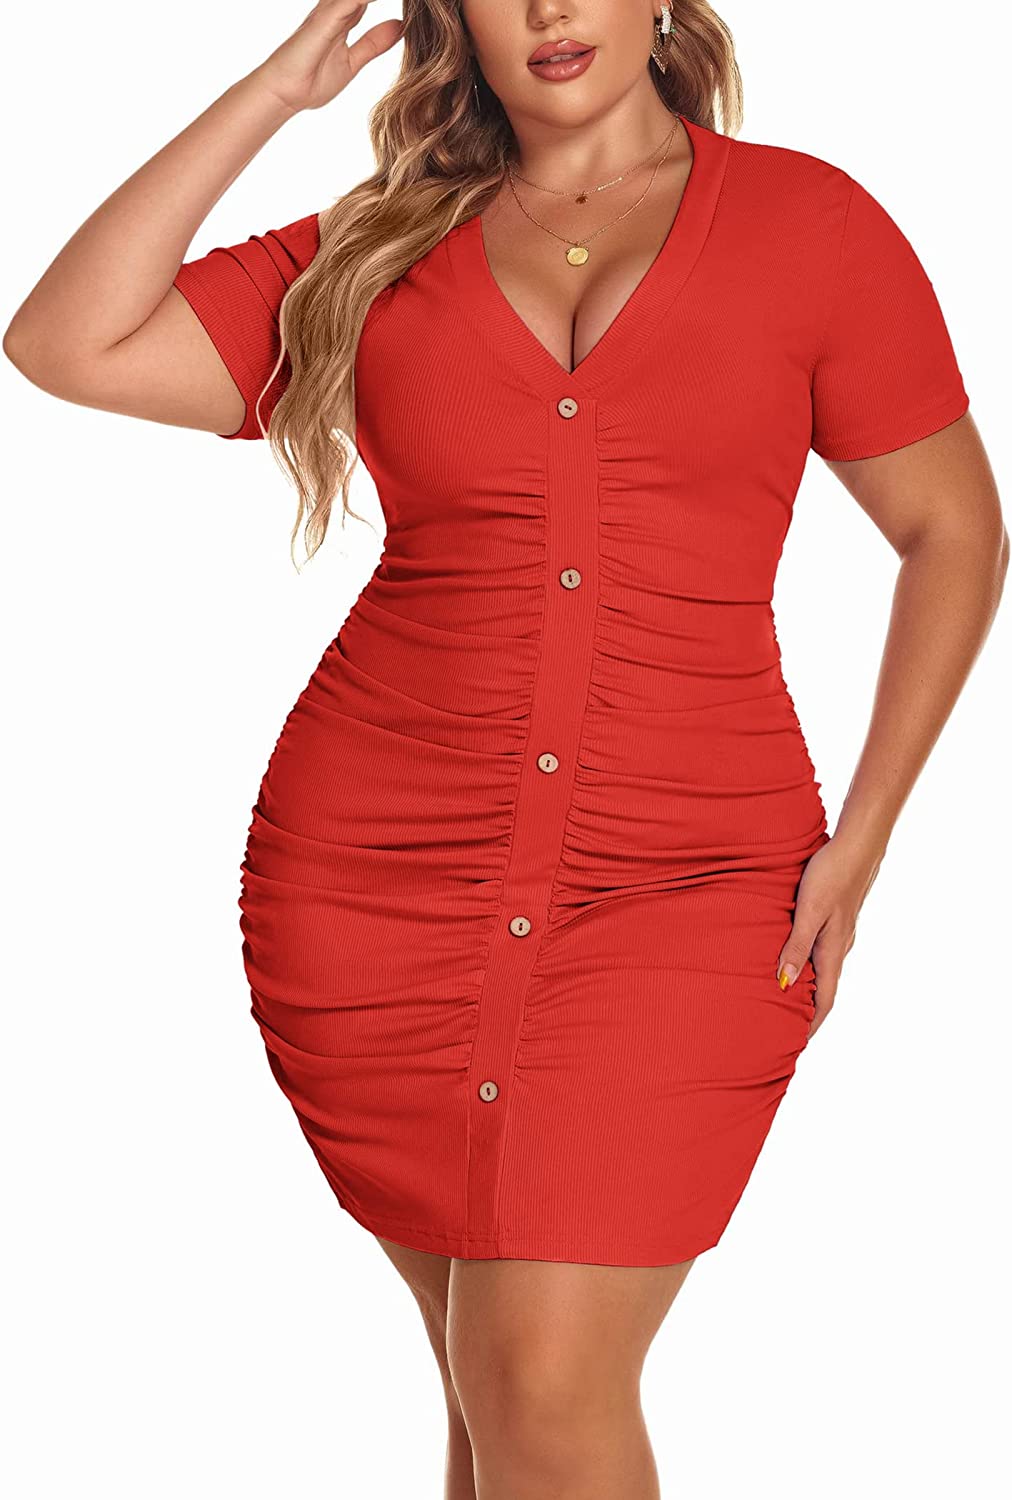 IN'VOLAND Women Plus Size Short Sleeve Solid Color Bodycon Tight Ruched  Wrap T Shirt Dress at  Women's Clothing store